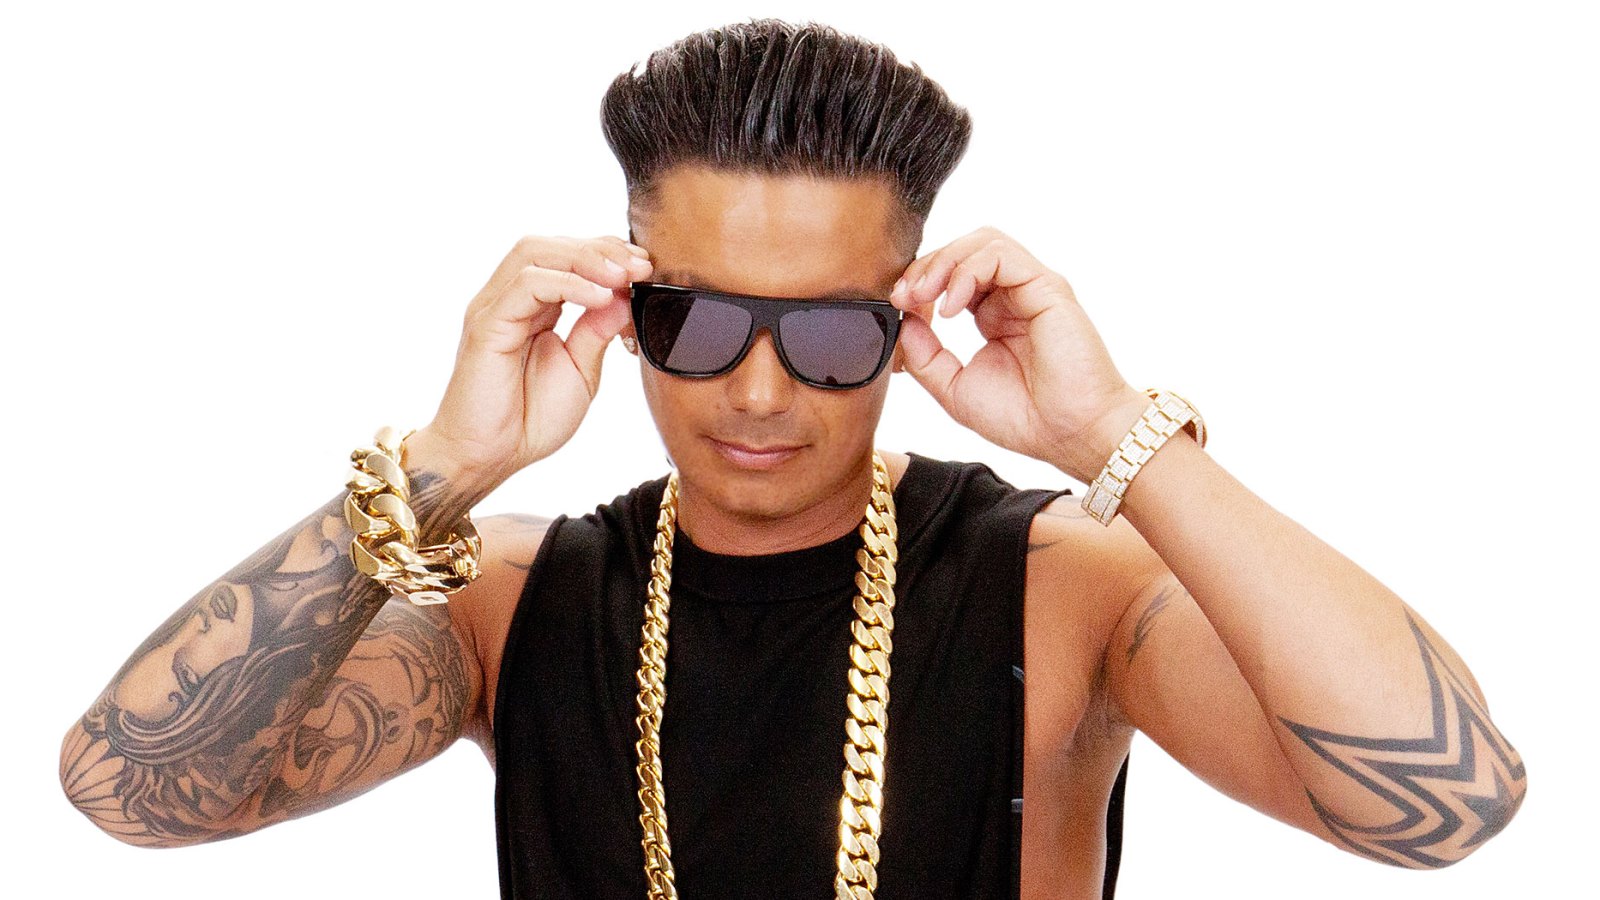 DJ Pauly D Talks About His Gelled Hair, Got2b Product Launch